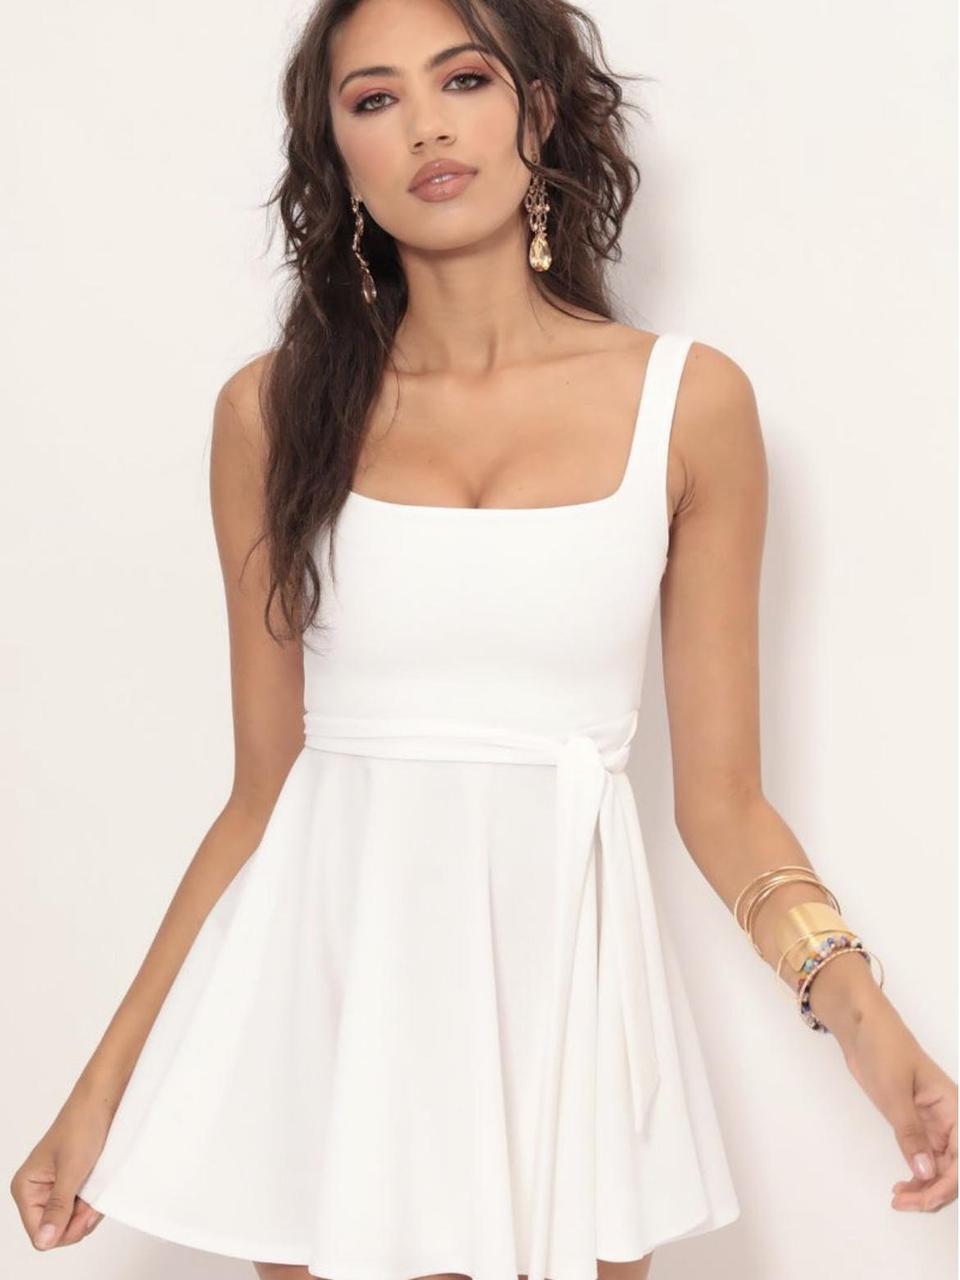 Lucy in the Sky Women's White Dress (2)